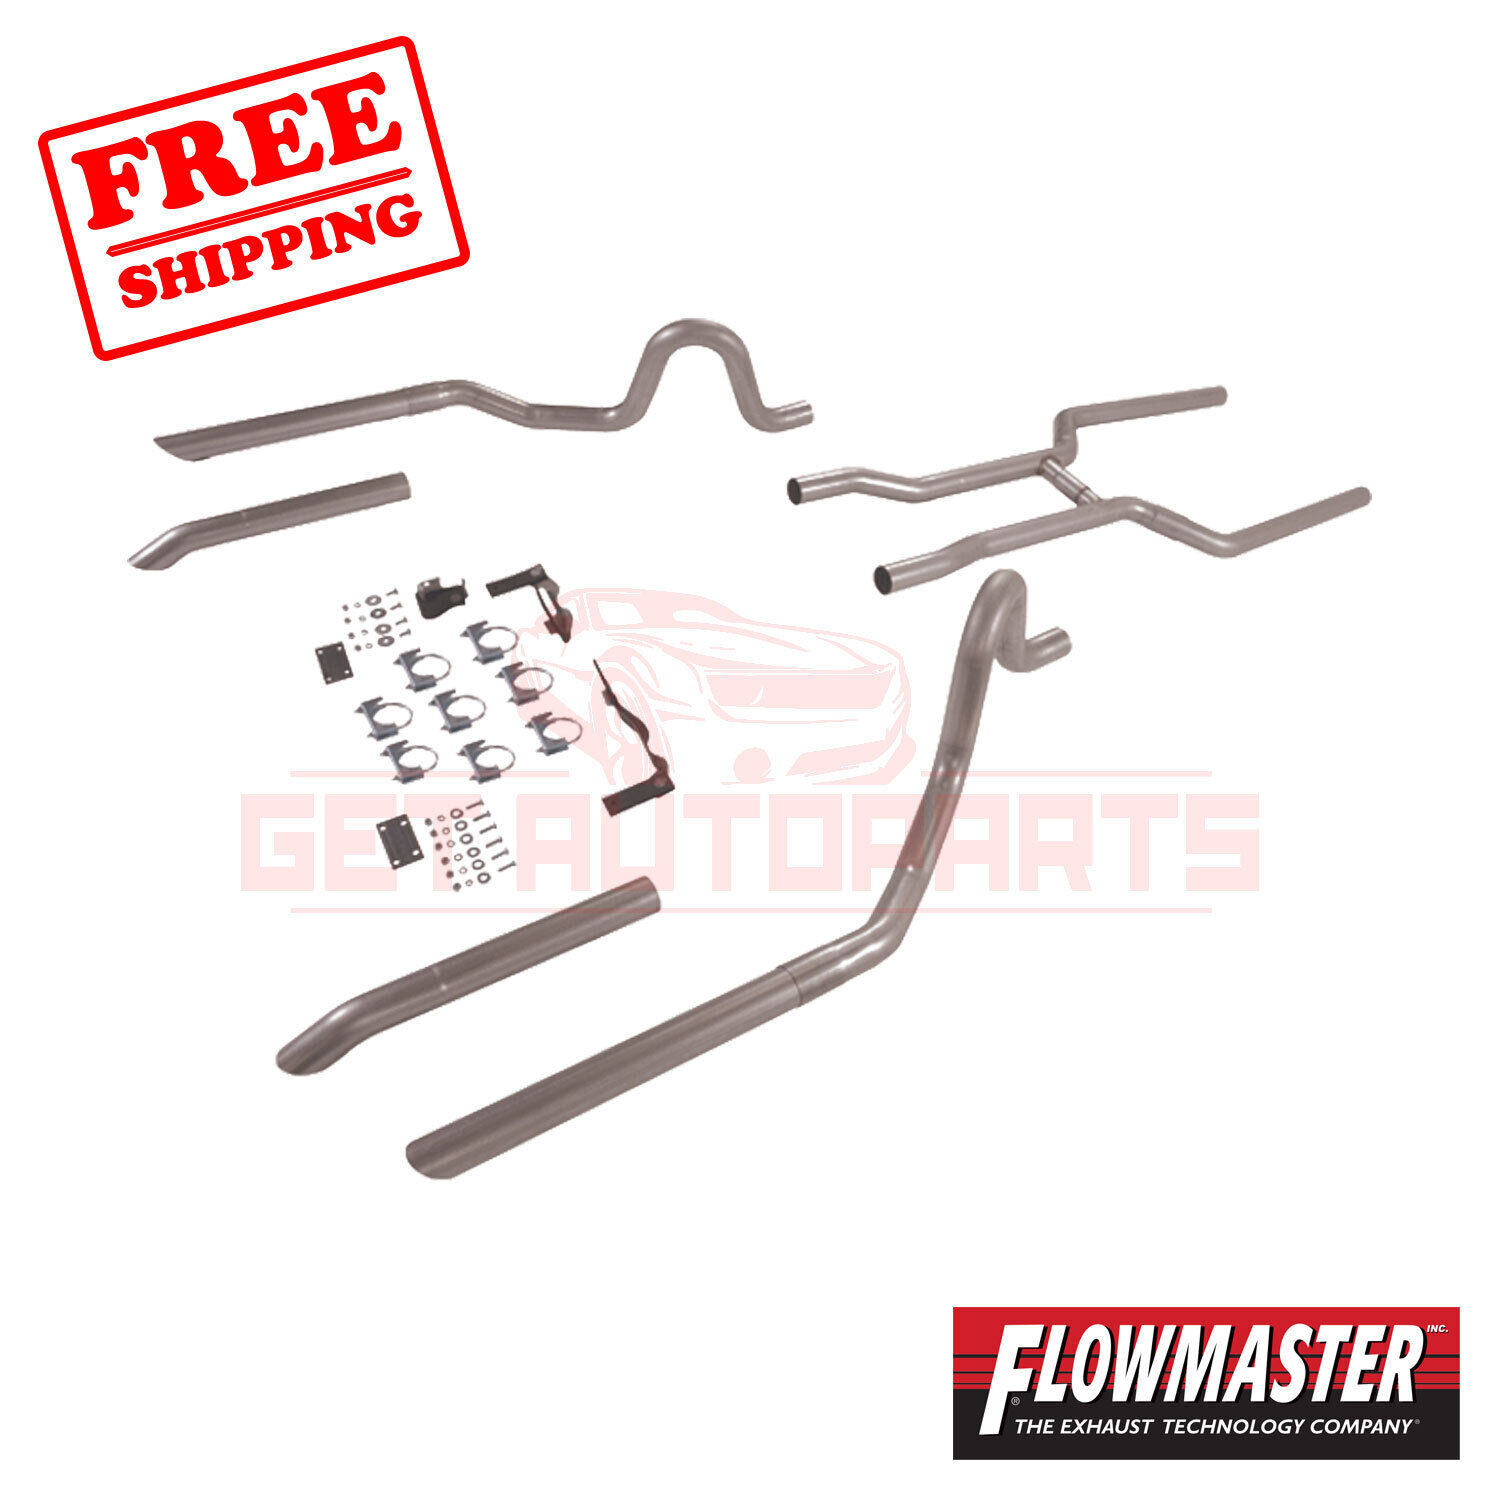 FlowMaster Pipe System Kit for Buick GS 400 1968-69